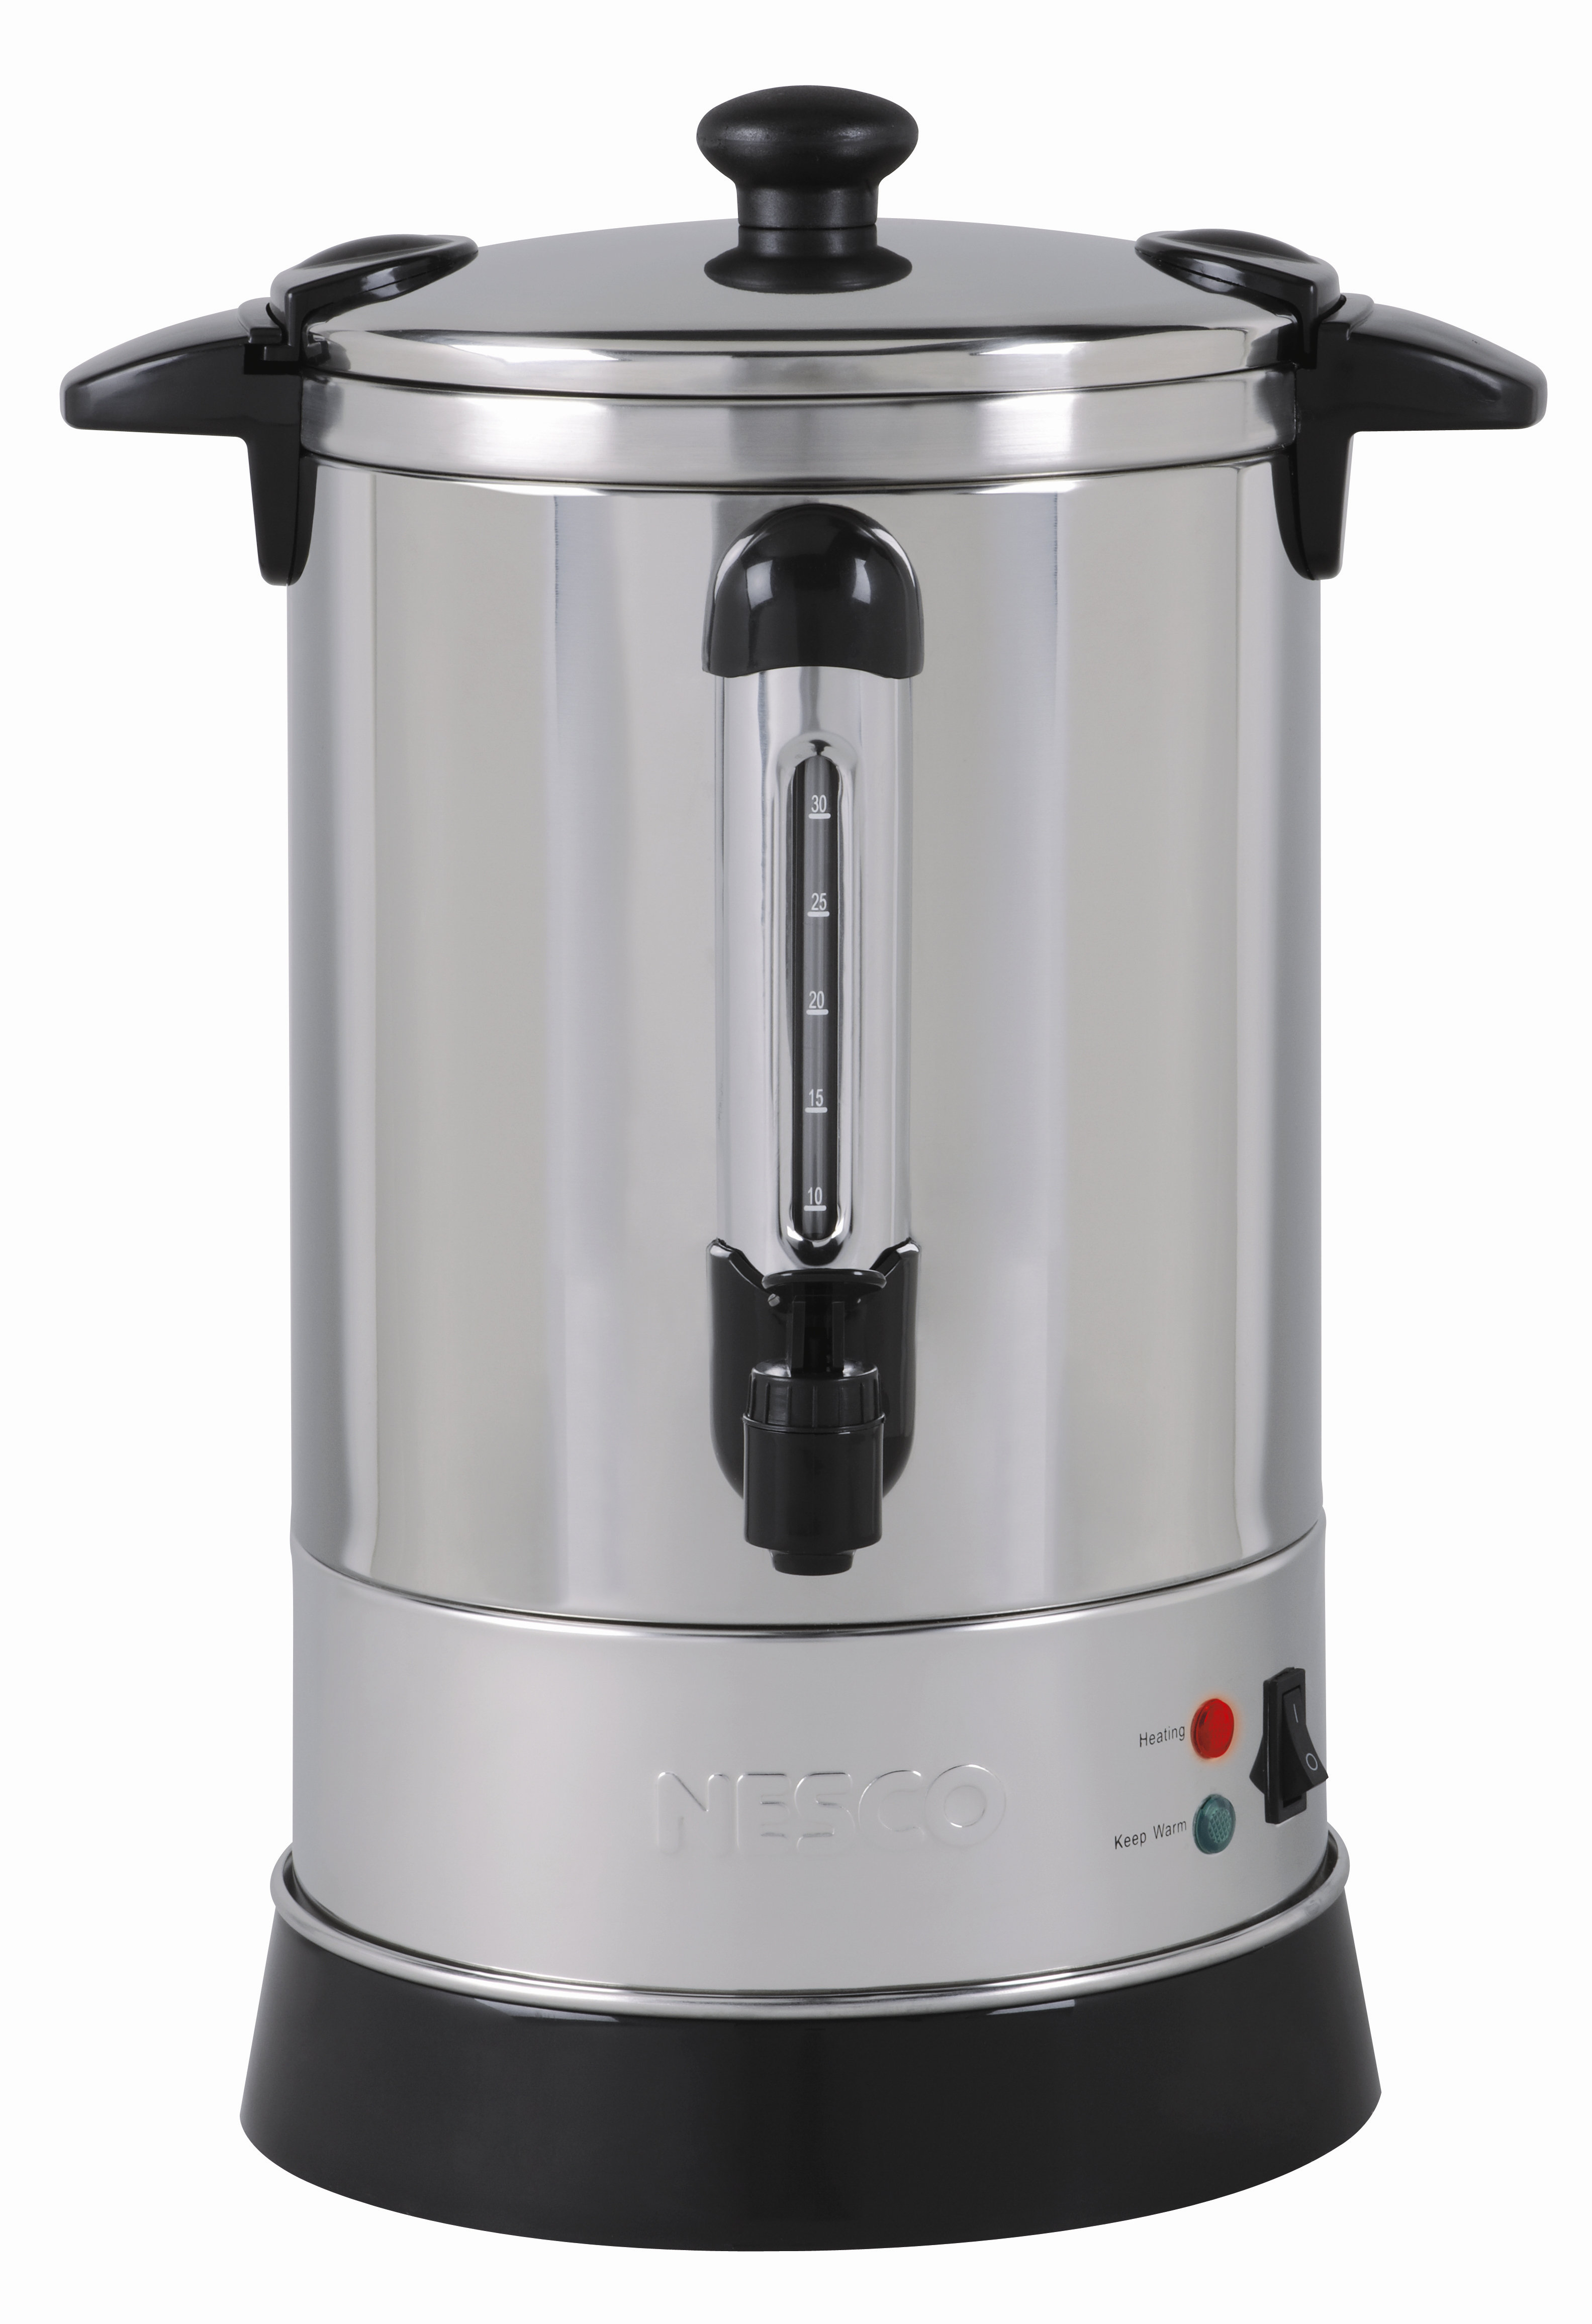 Coffee Urn, 30-Cup, Stainless Steel - Professional Series